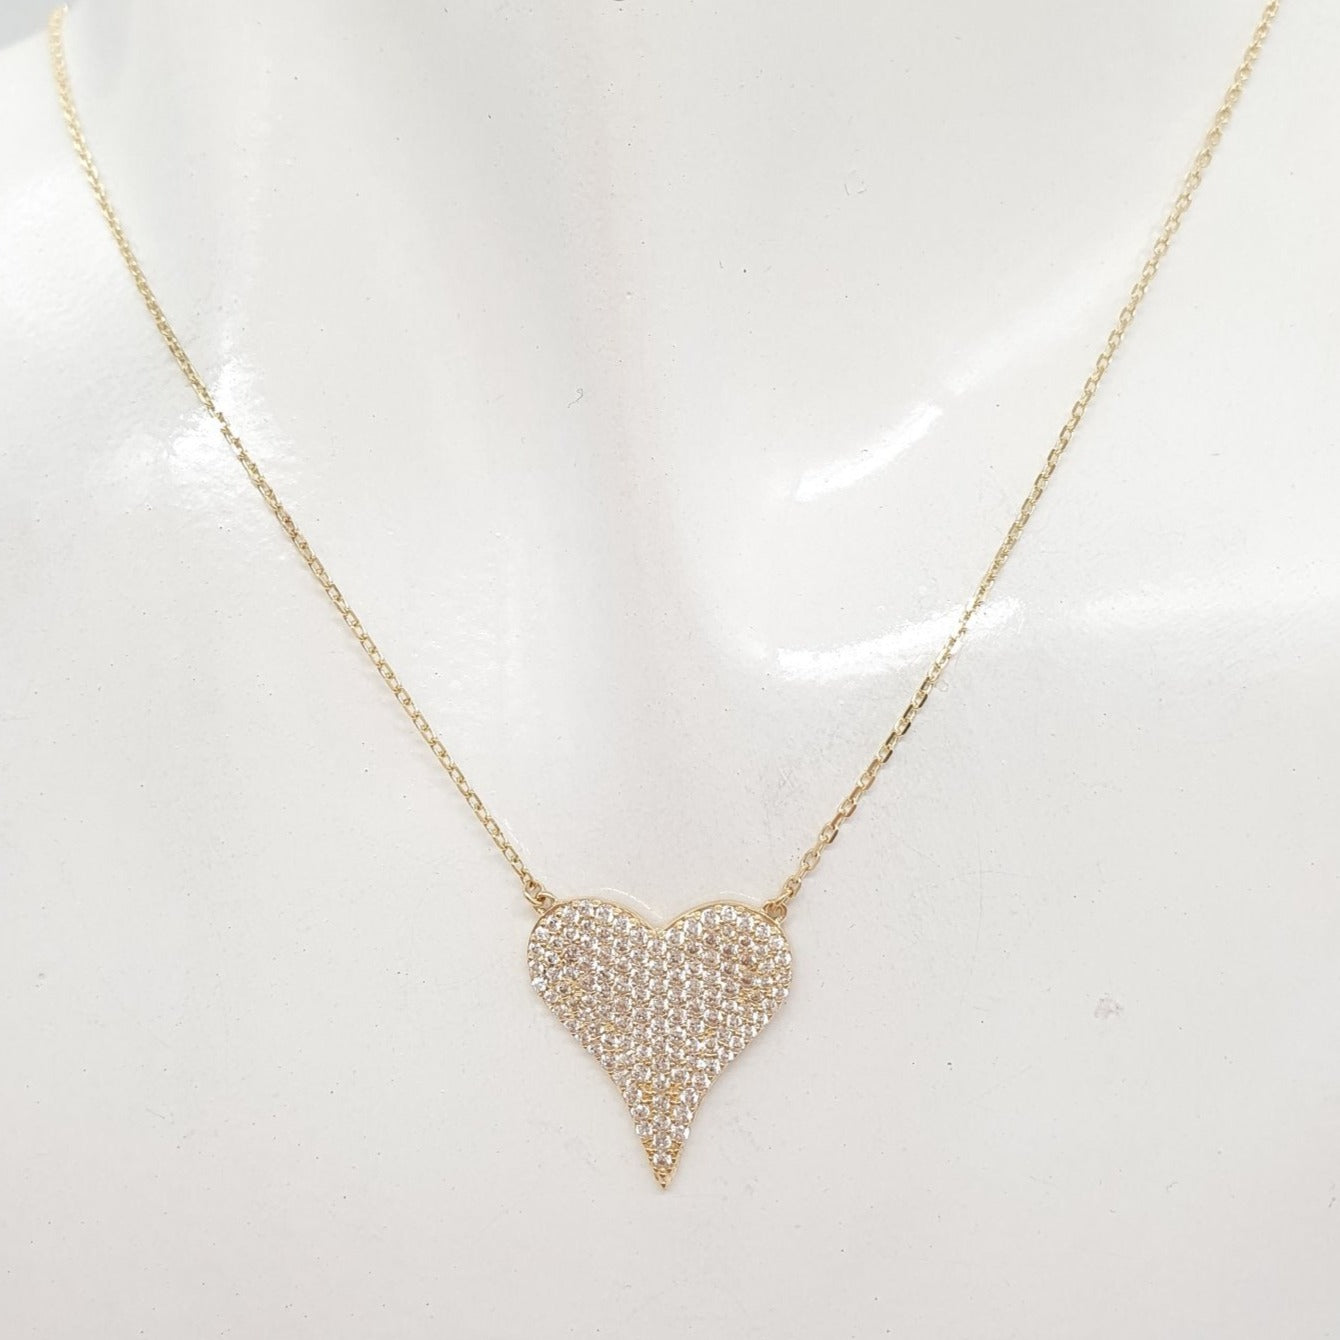 Pink/White Heart Center Necklace 18K Gold